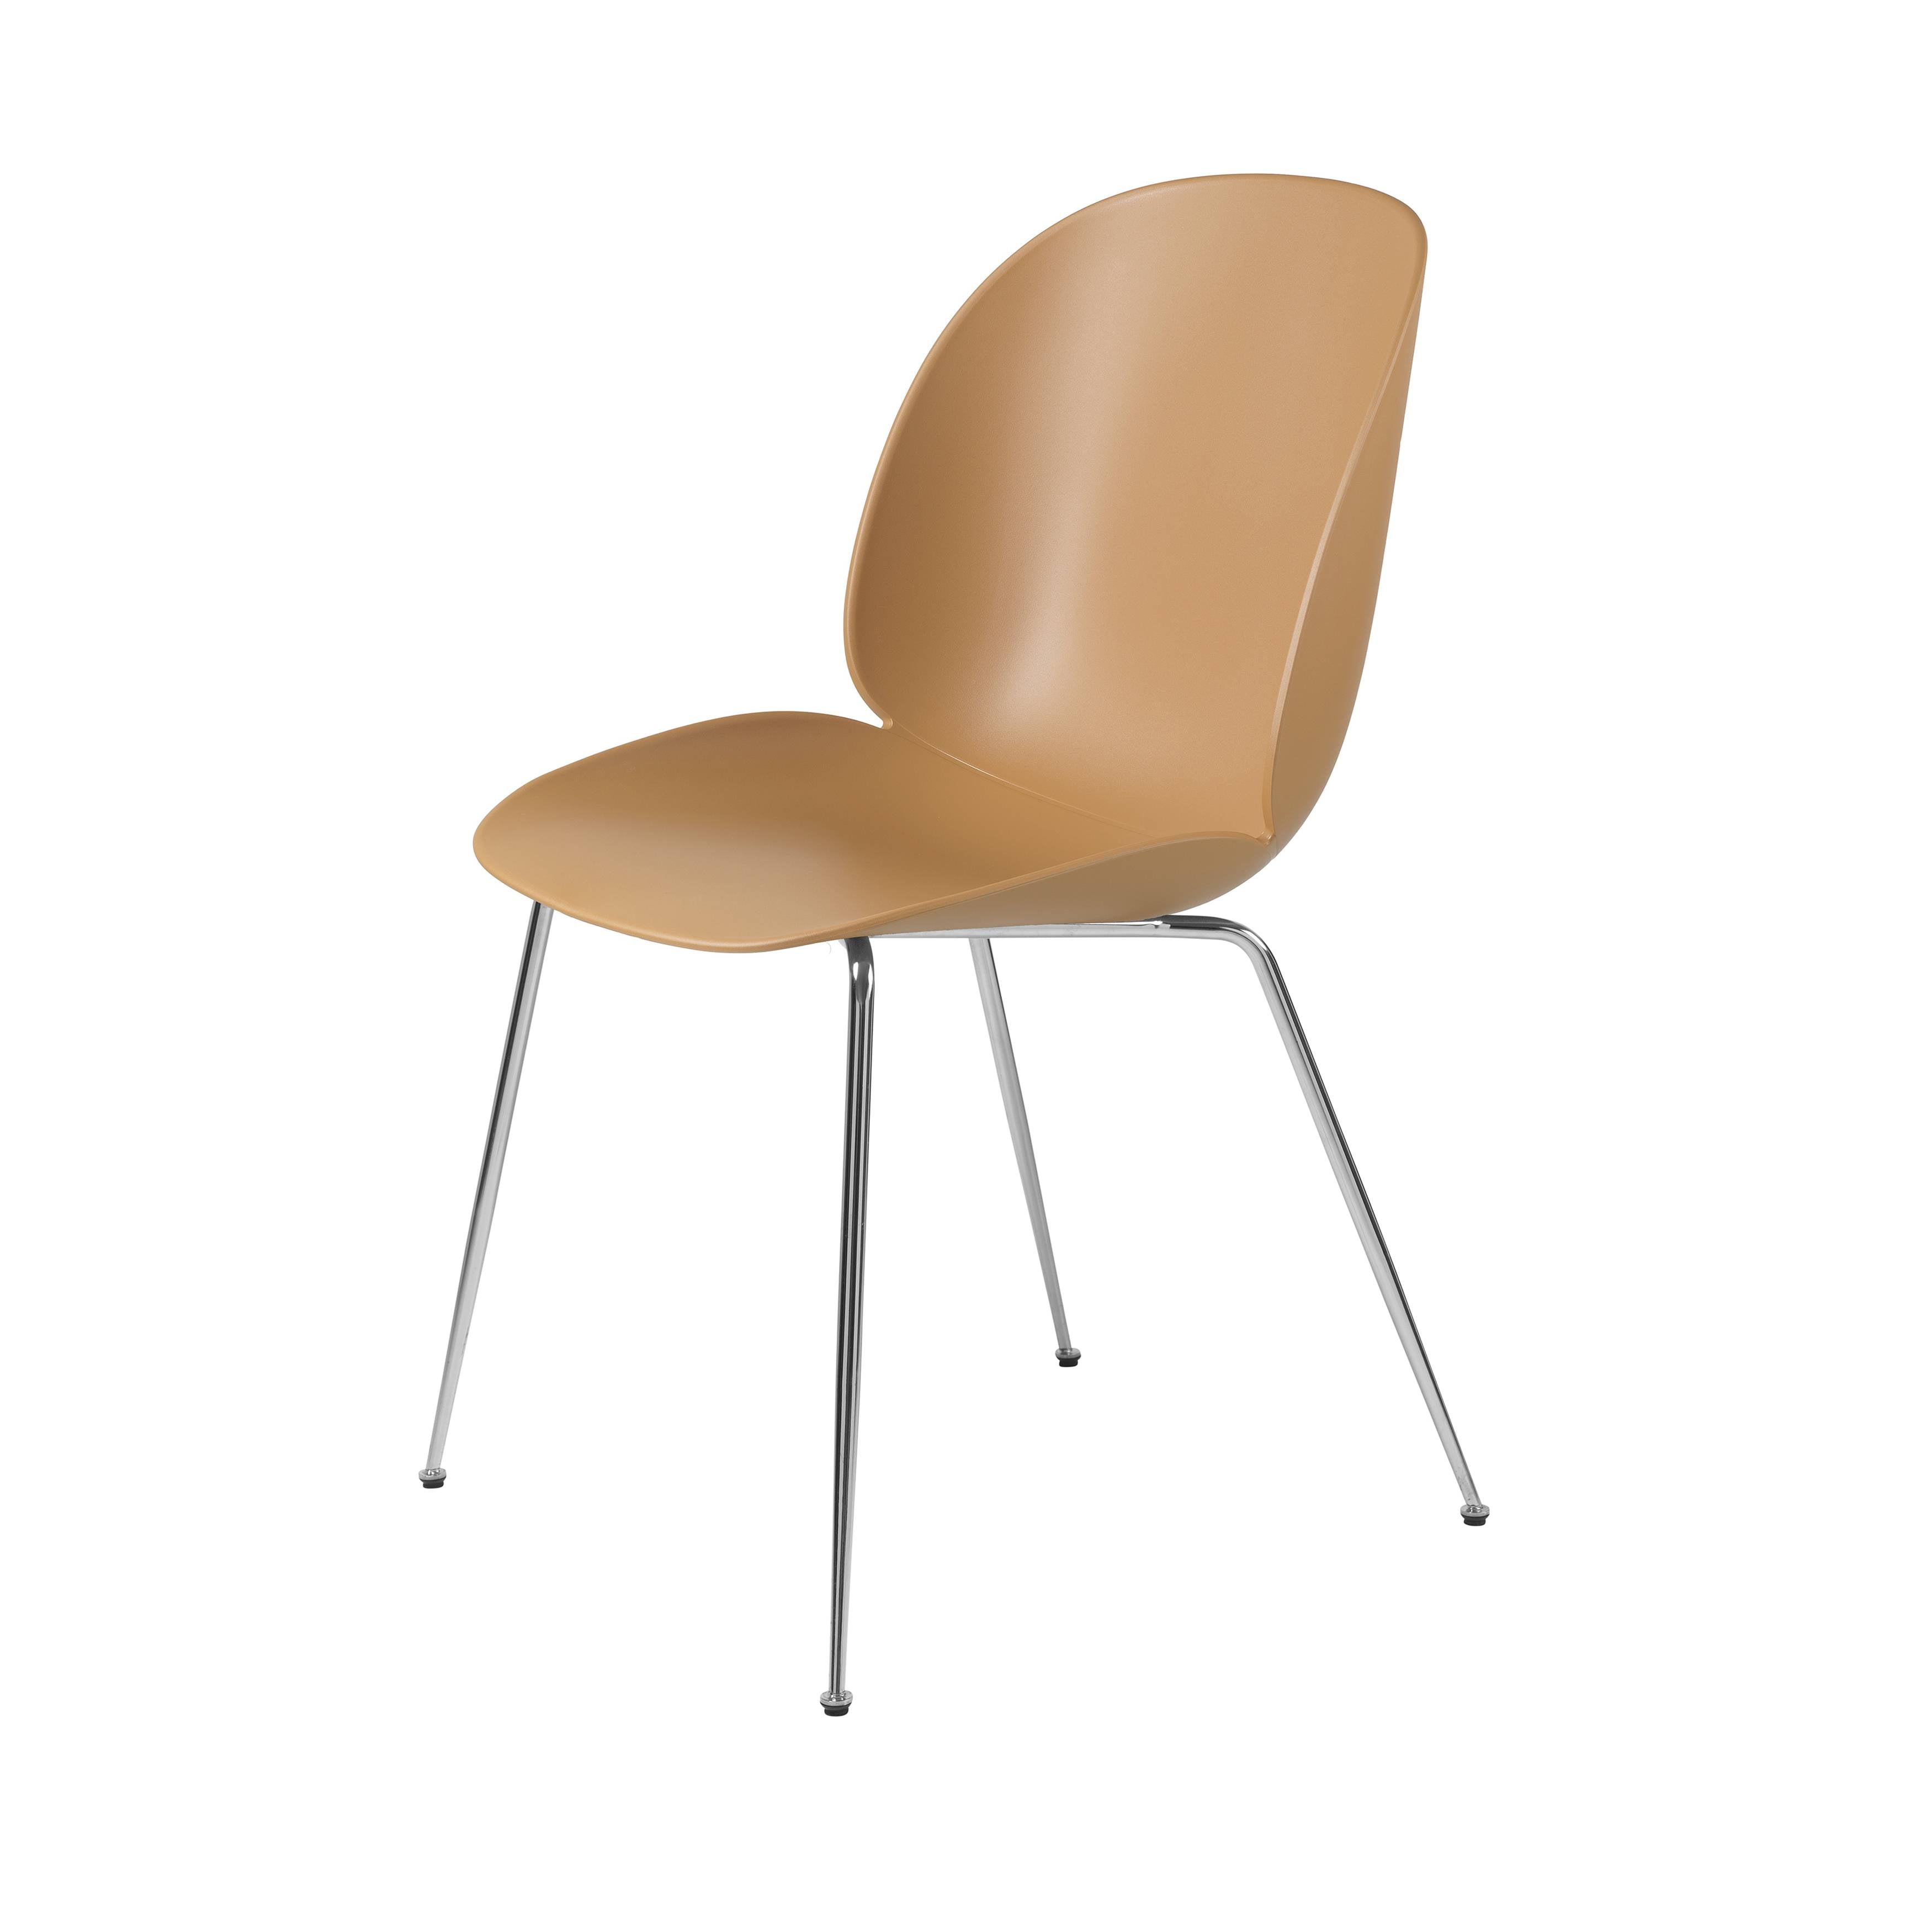 Beetle Dining Chair: Conic Base + Amber Brown + Chrome + Felt Glides